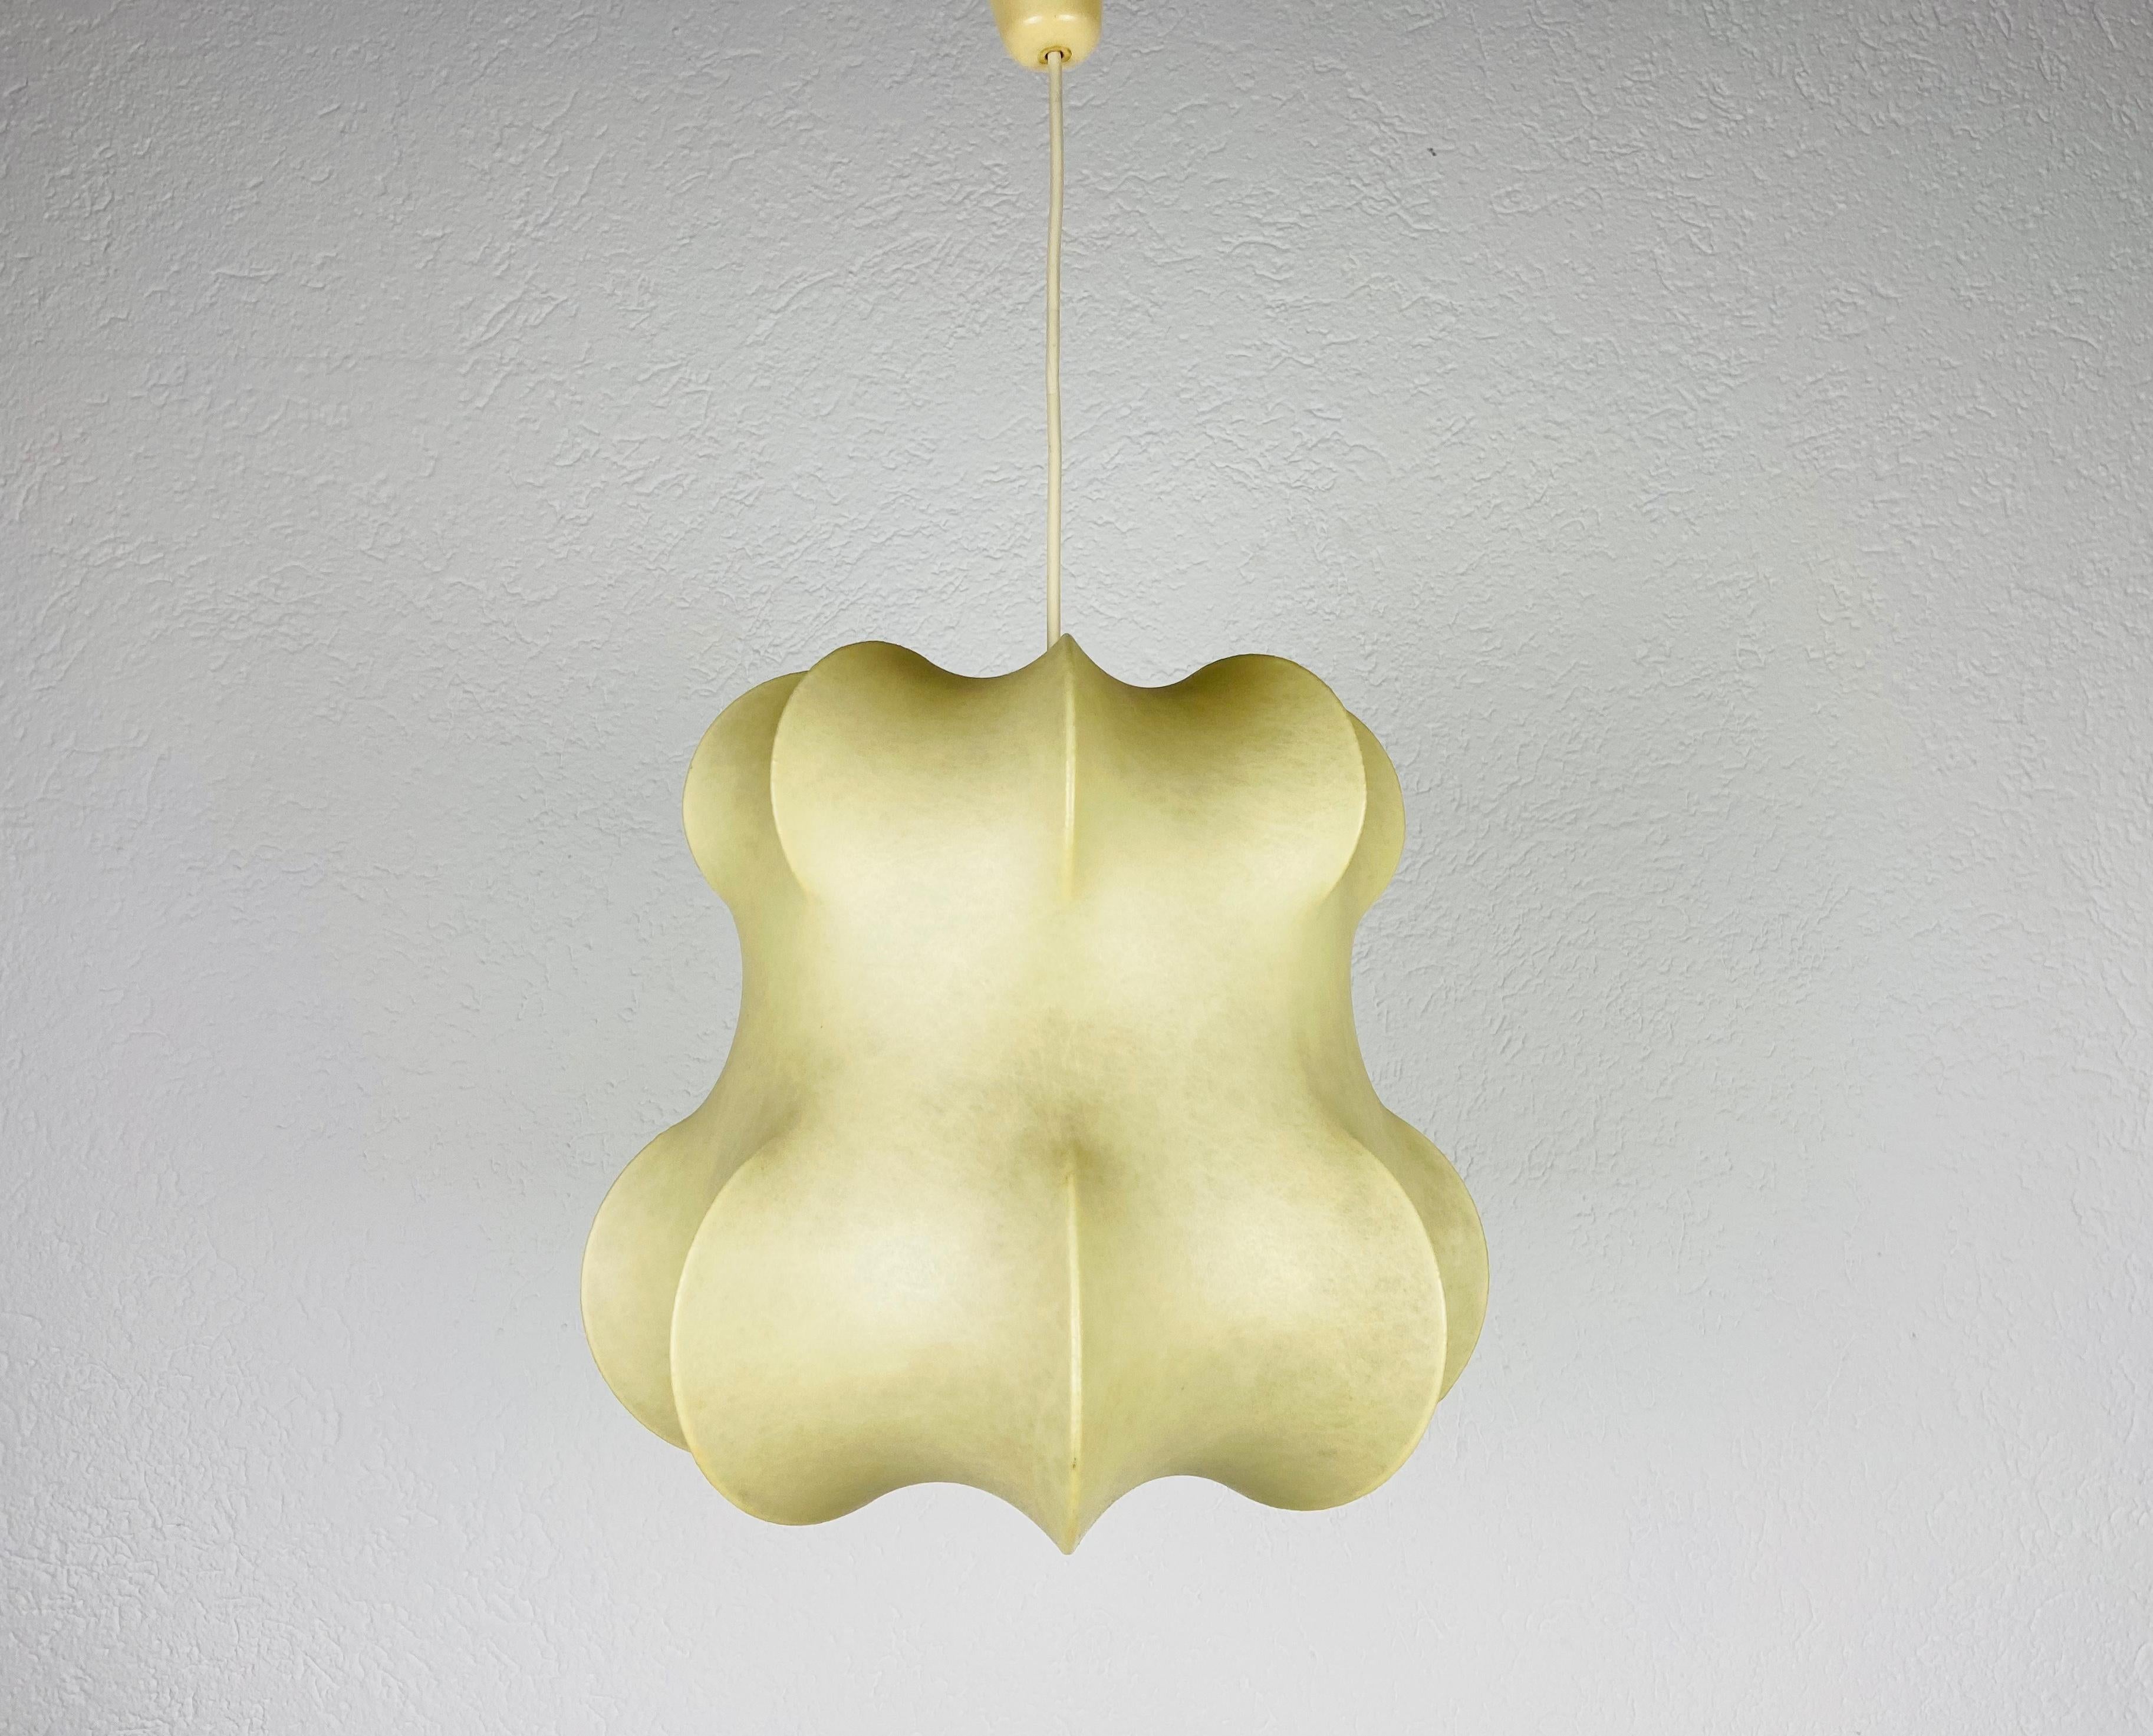 A cocoon pendant lamp made in Italy in the 1960s. The hanging lamp has a design similar to the lightings made by Achille Castiglioni. The lamp shade is of original resin and has a flower shape.

Measures: Height 31-63 cm 
Diameter 35 cm

The